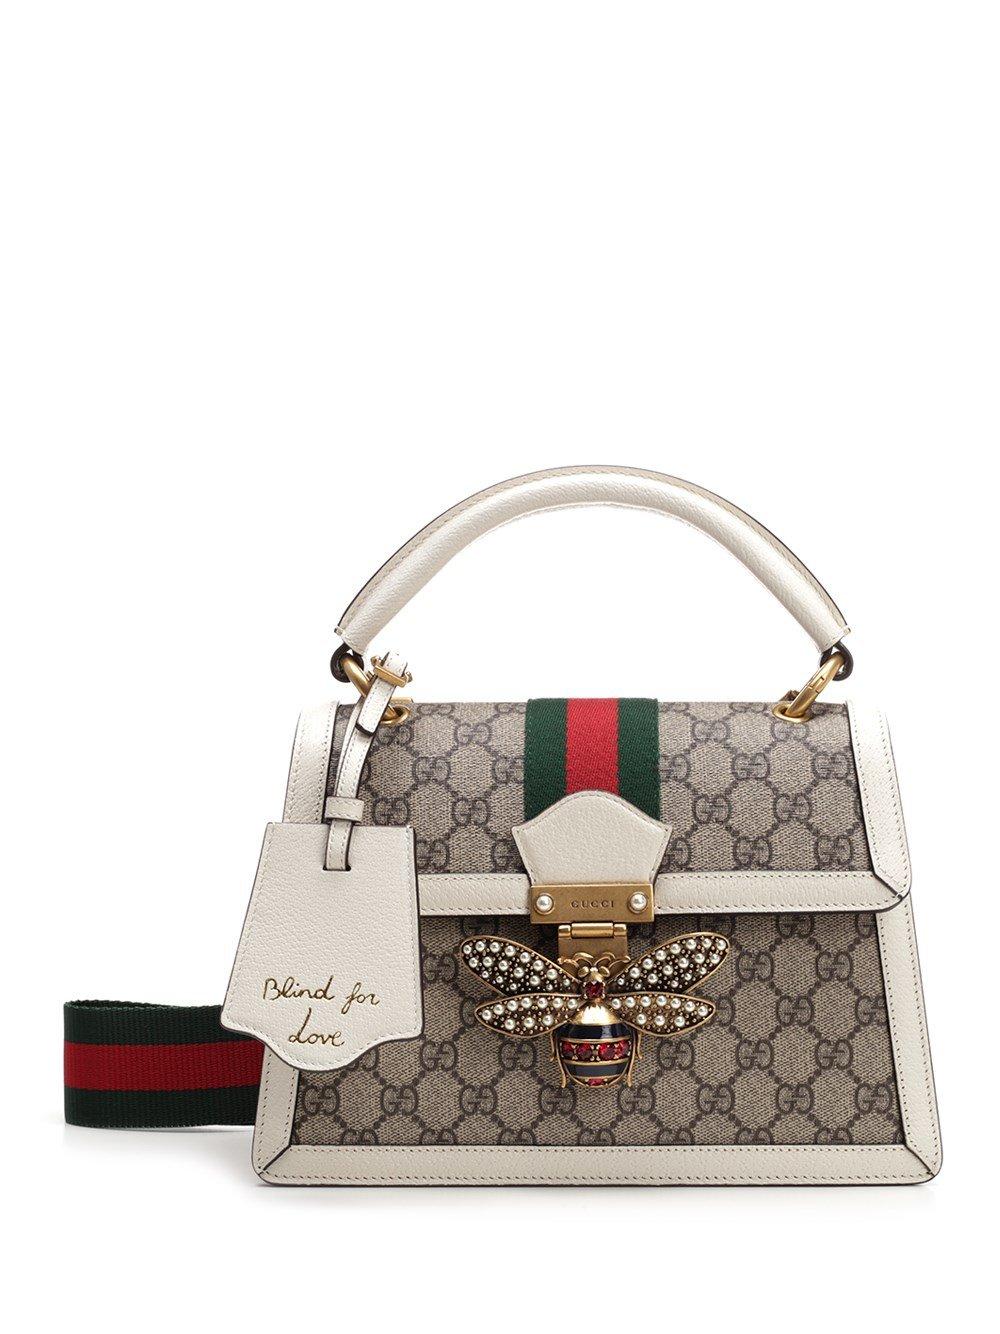 Gucci Queen Margaret Crystal Embellished Bee Clasp Tote Bag in Red